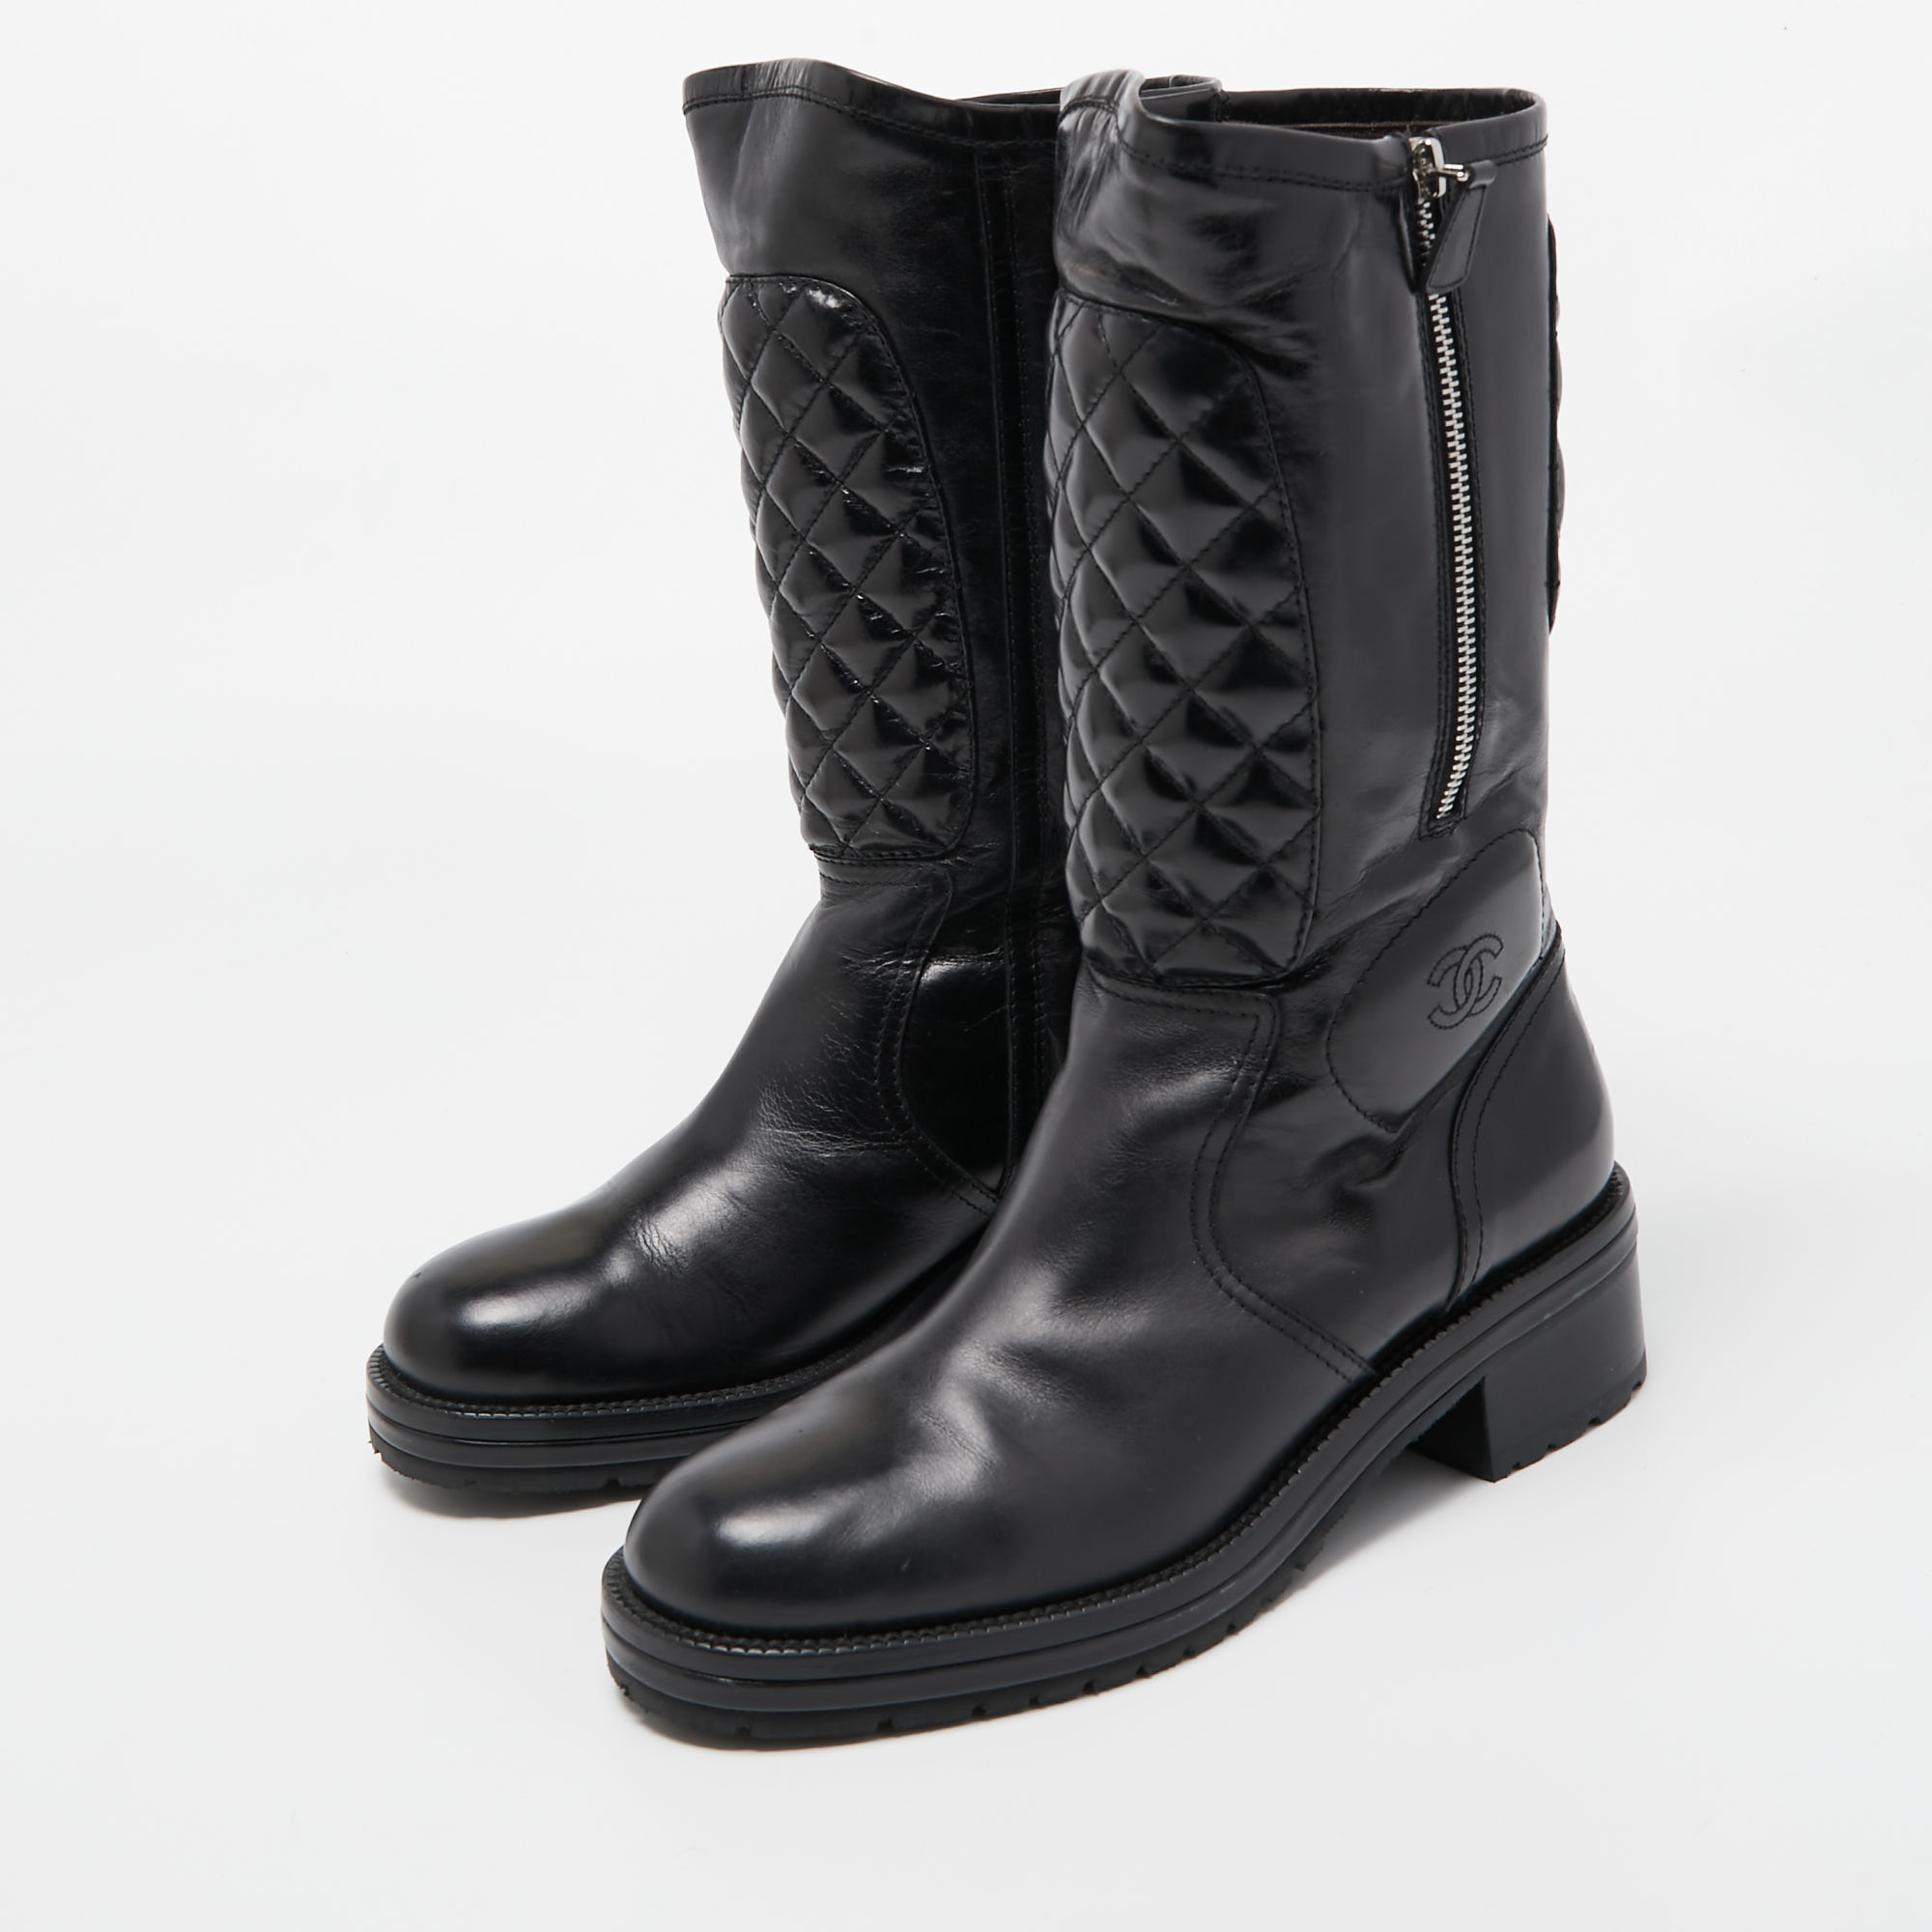 

Chanel Black Quilted Leather Mid Calf Boots Size